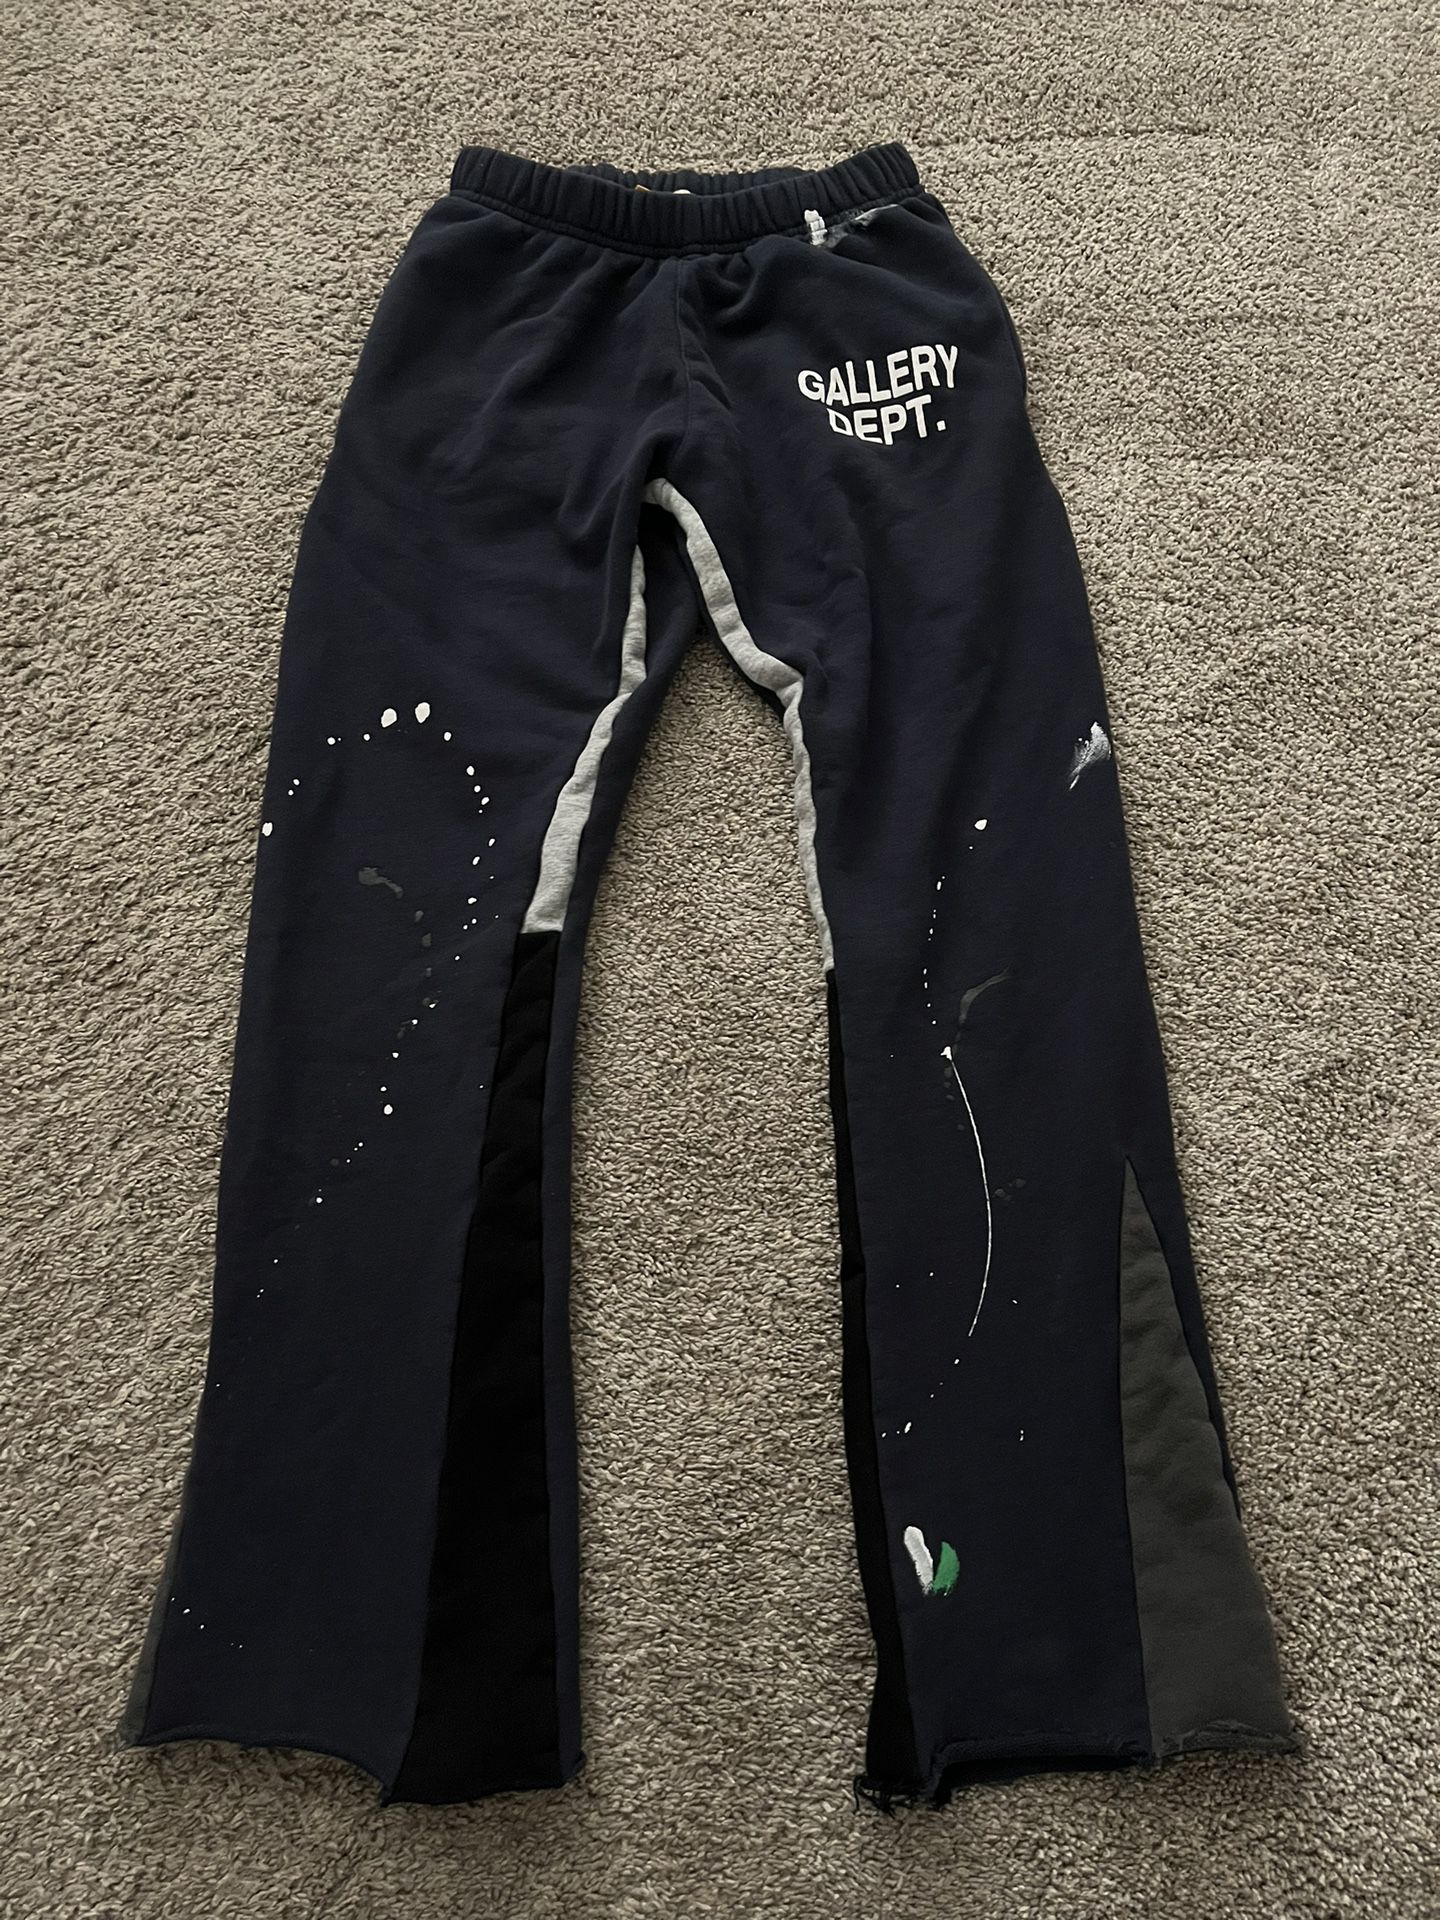 Gallery Dept. Flare Sweat Pants Size Large for Sale in Visalia, CA ...